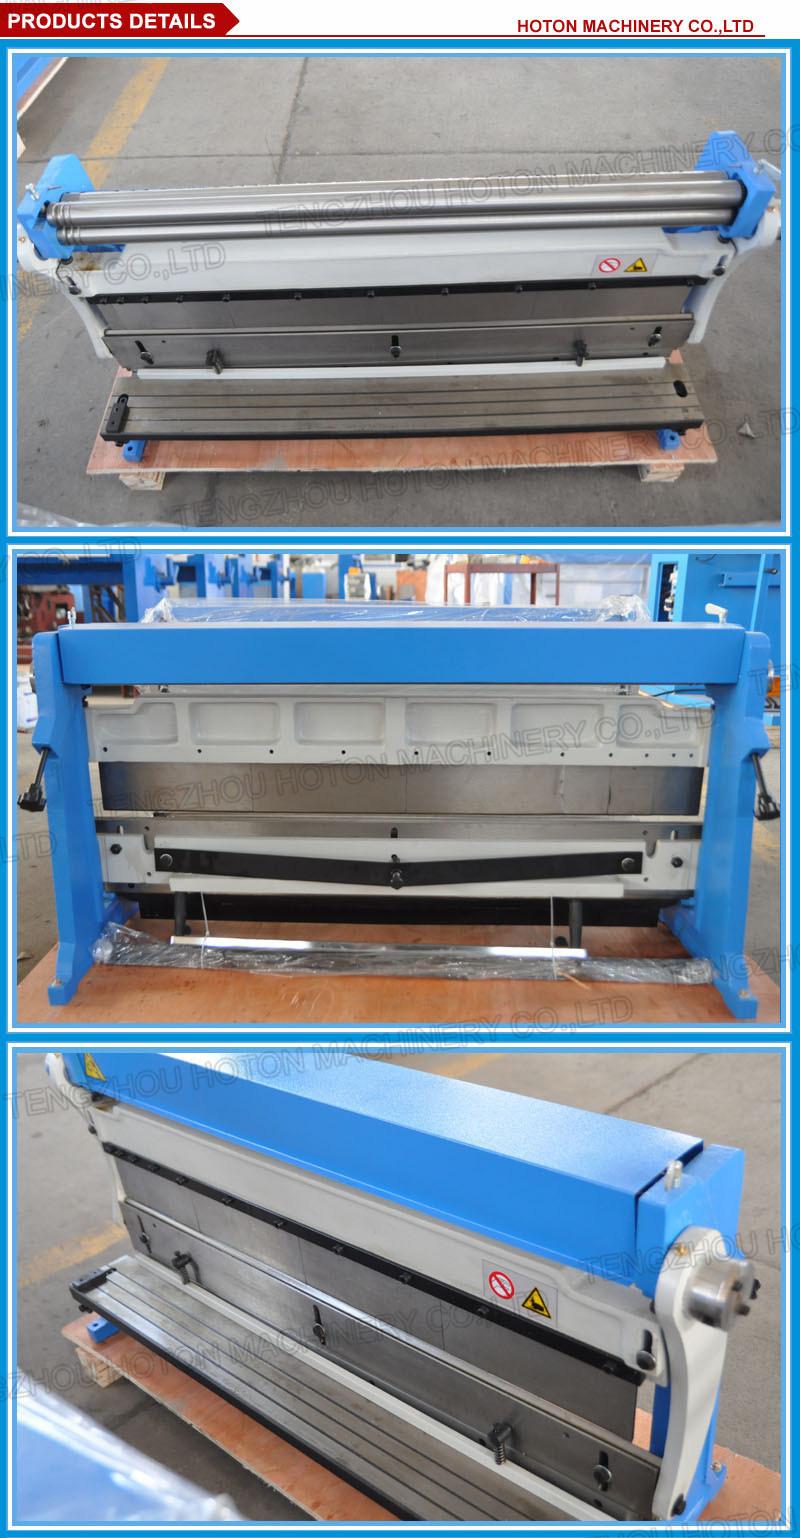 Combination of Shear Brake and Roll Machine (3-in-1/200/305/610)